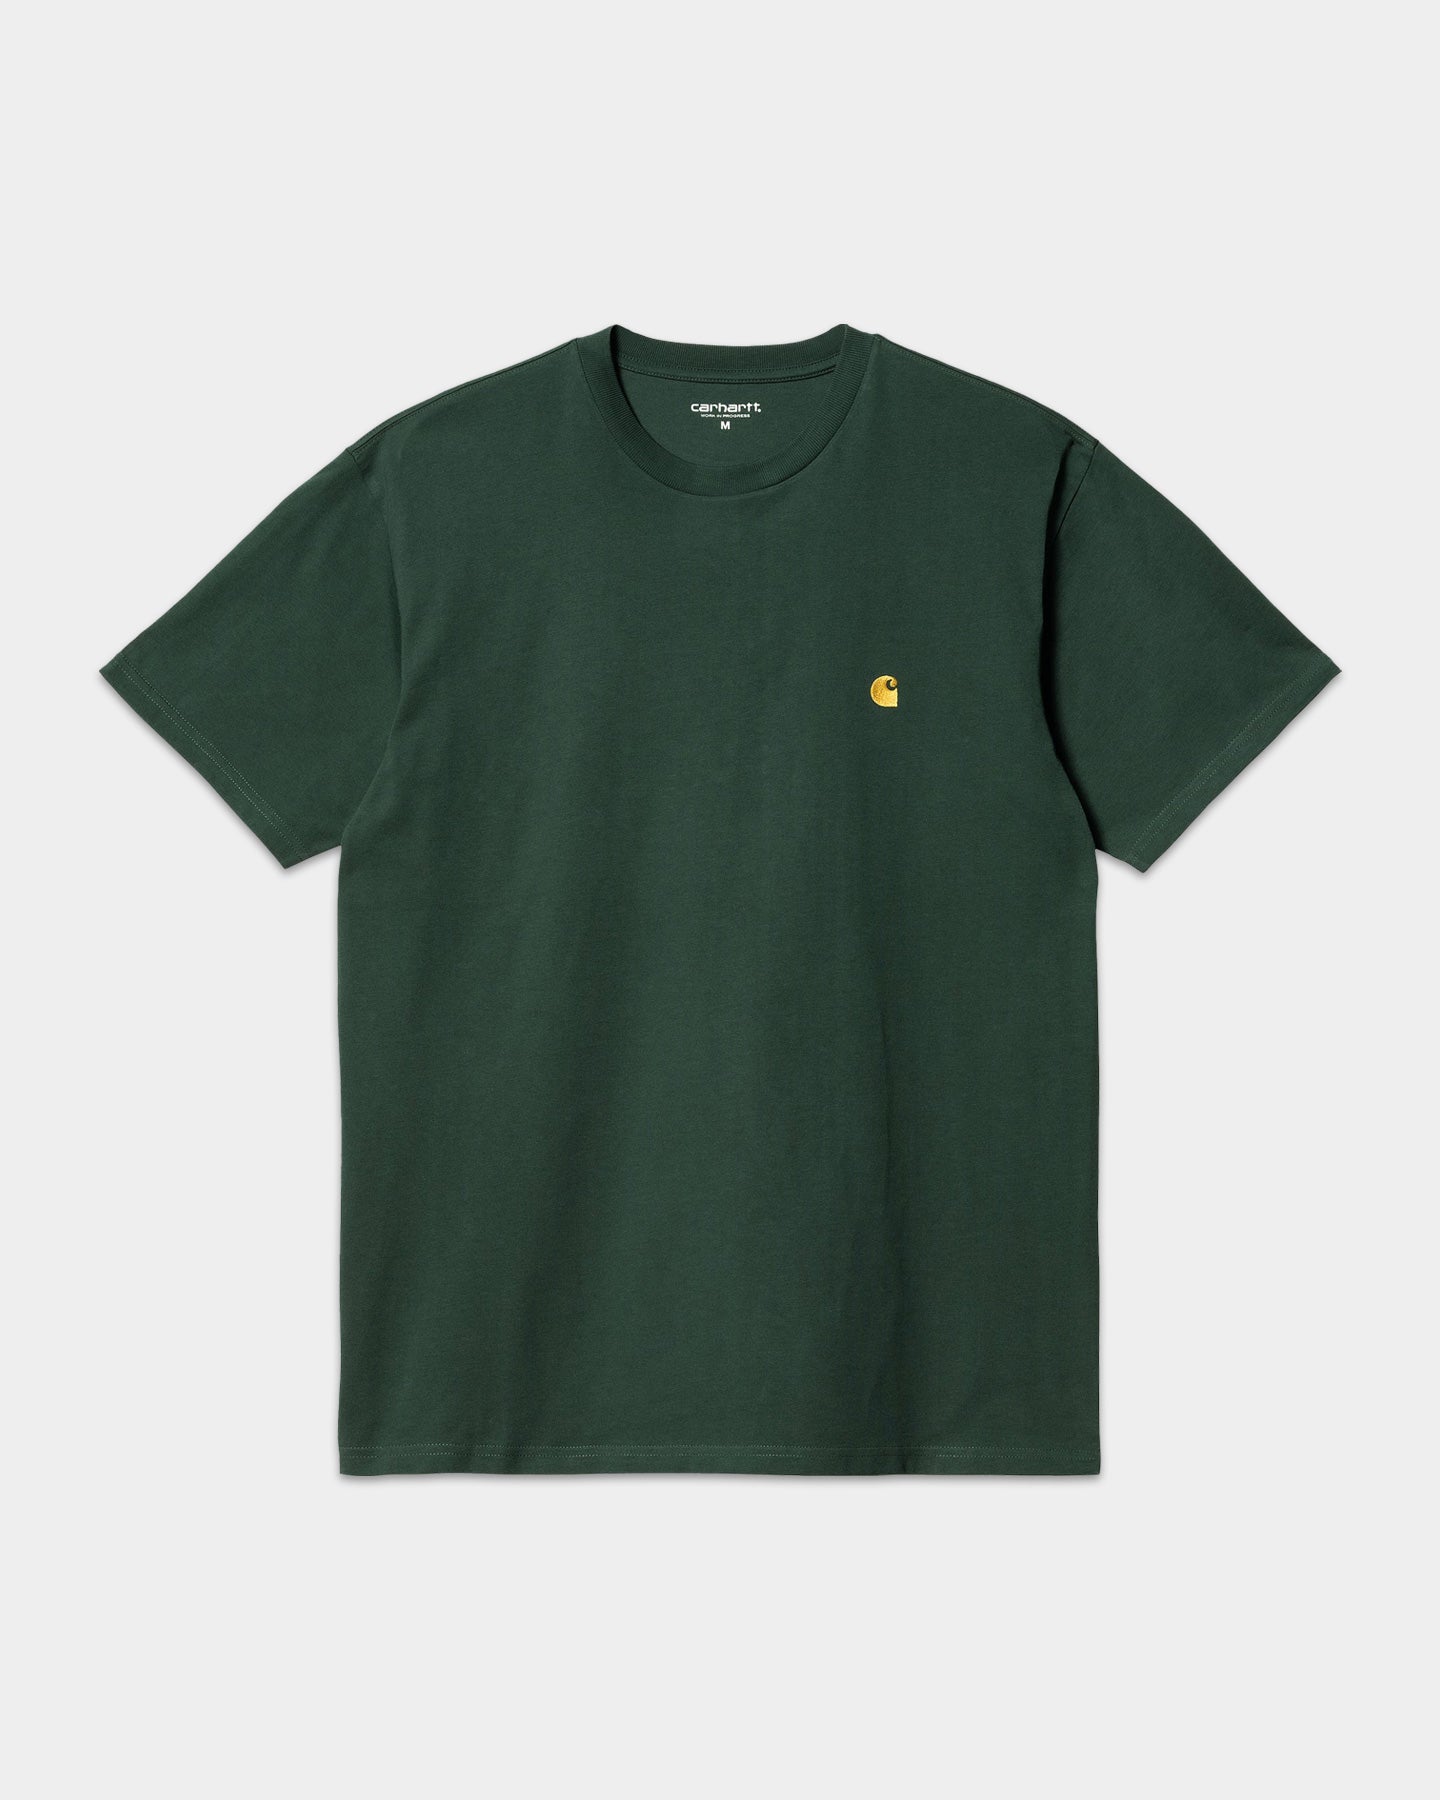 S/S CHASE T-SHIRT - discovery green/gold